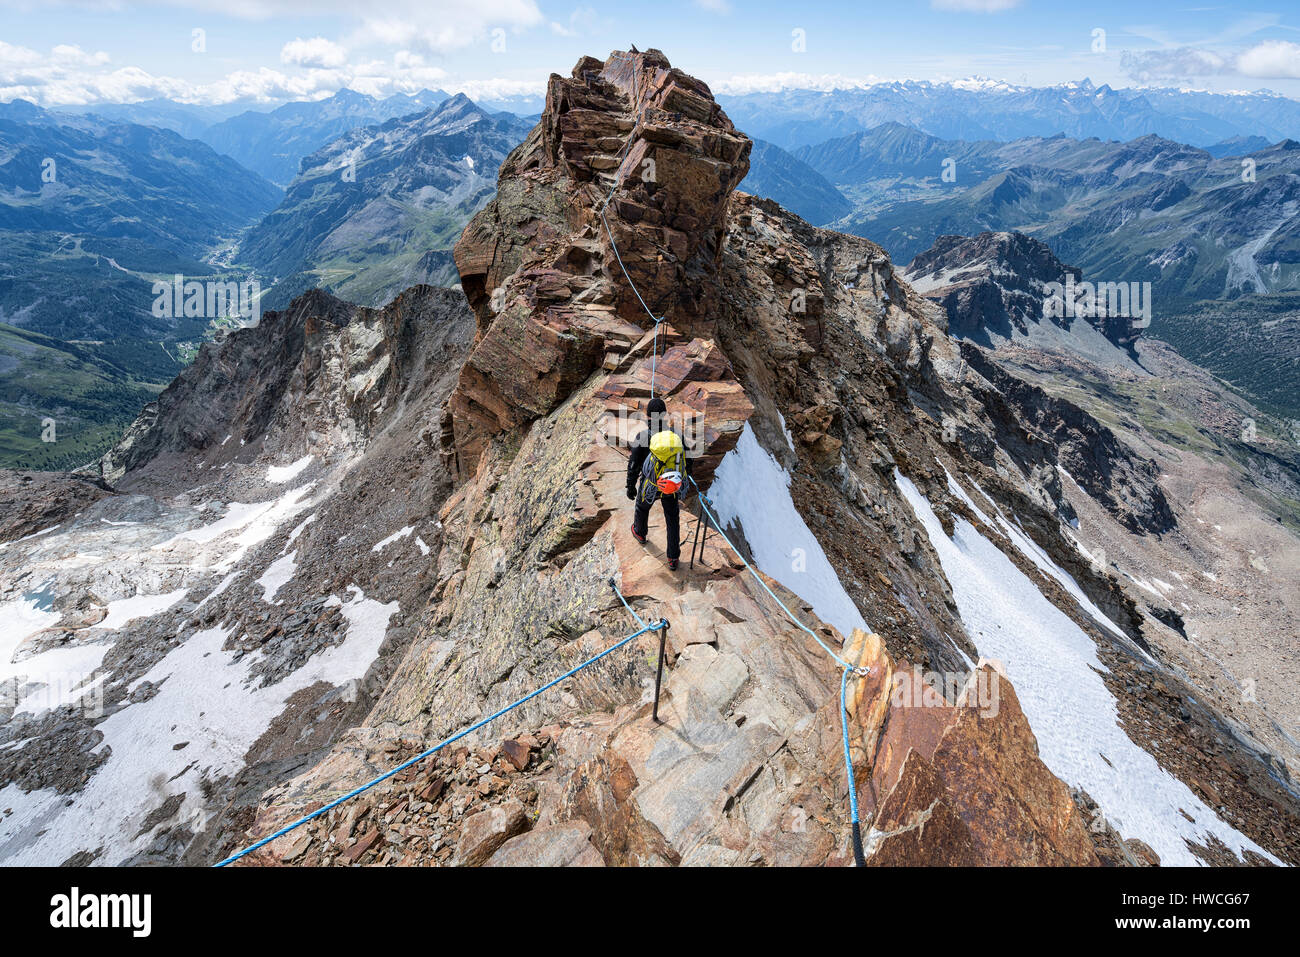 Descending from the Monte Rosa mountains, North Italy, Alps, Europe, EU Stock Photo